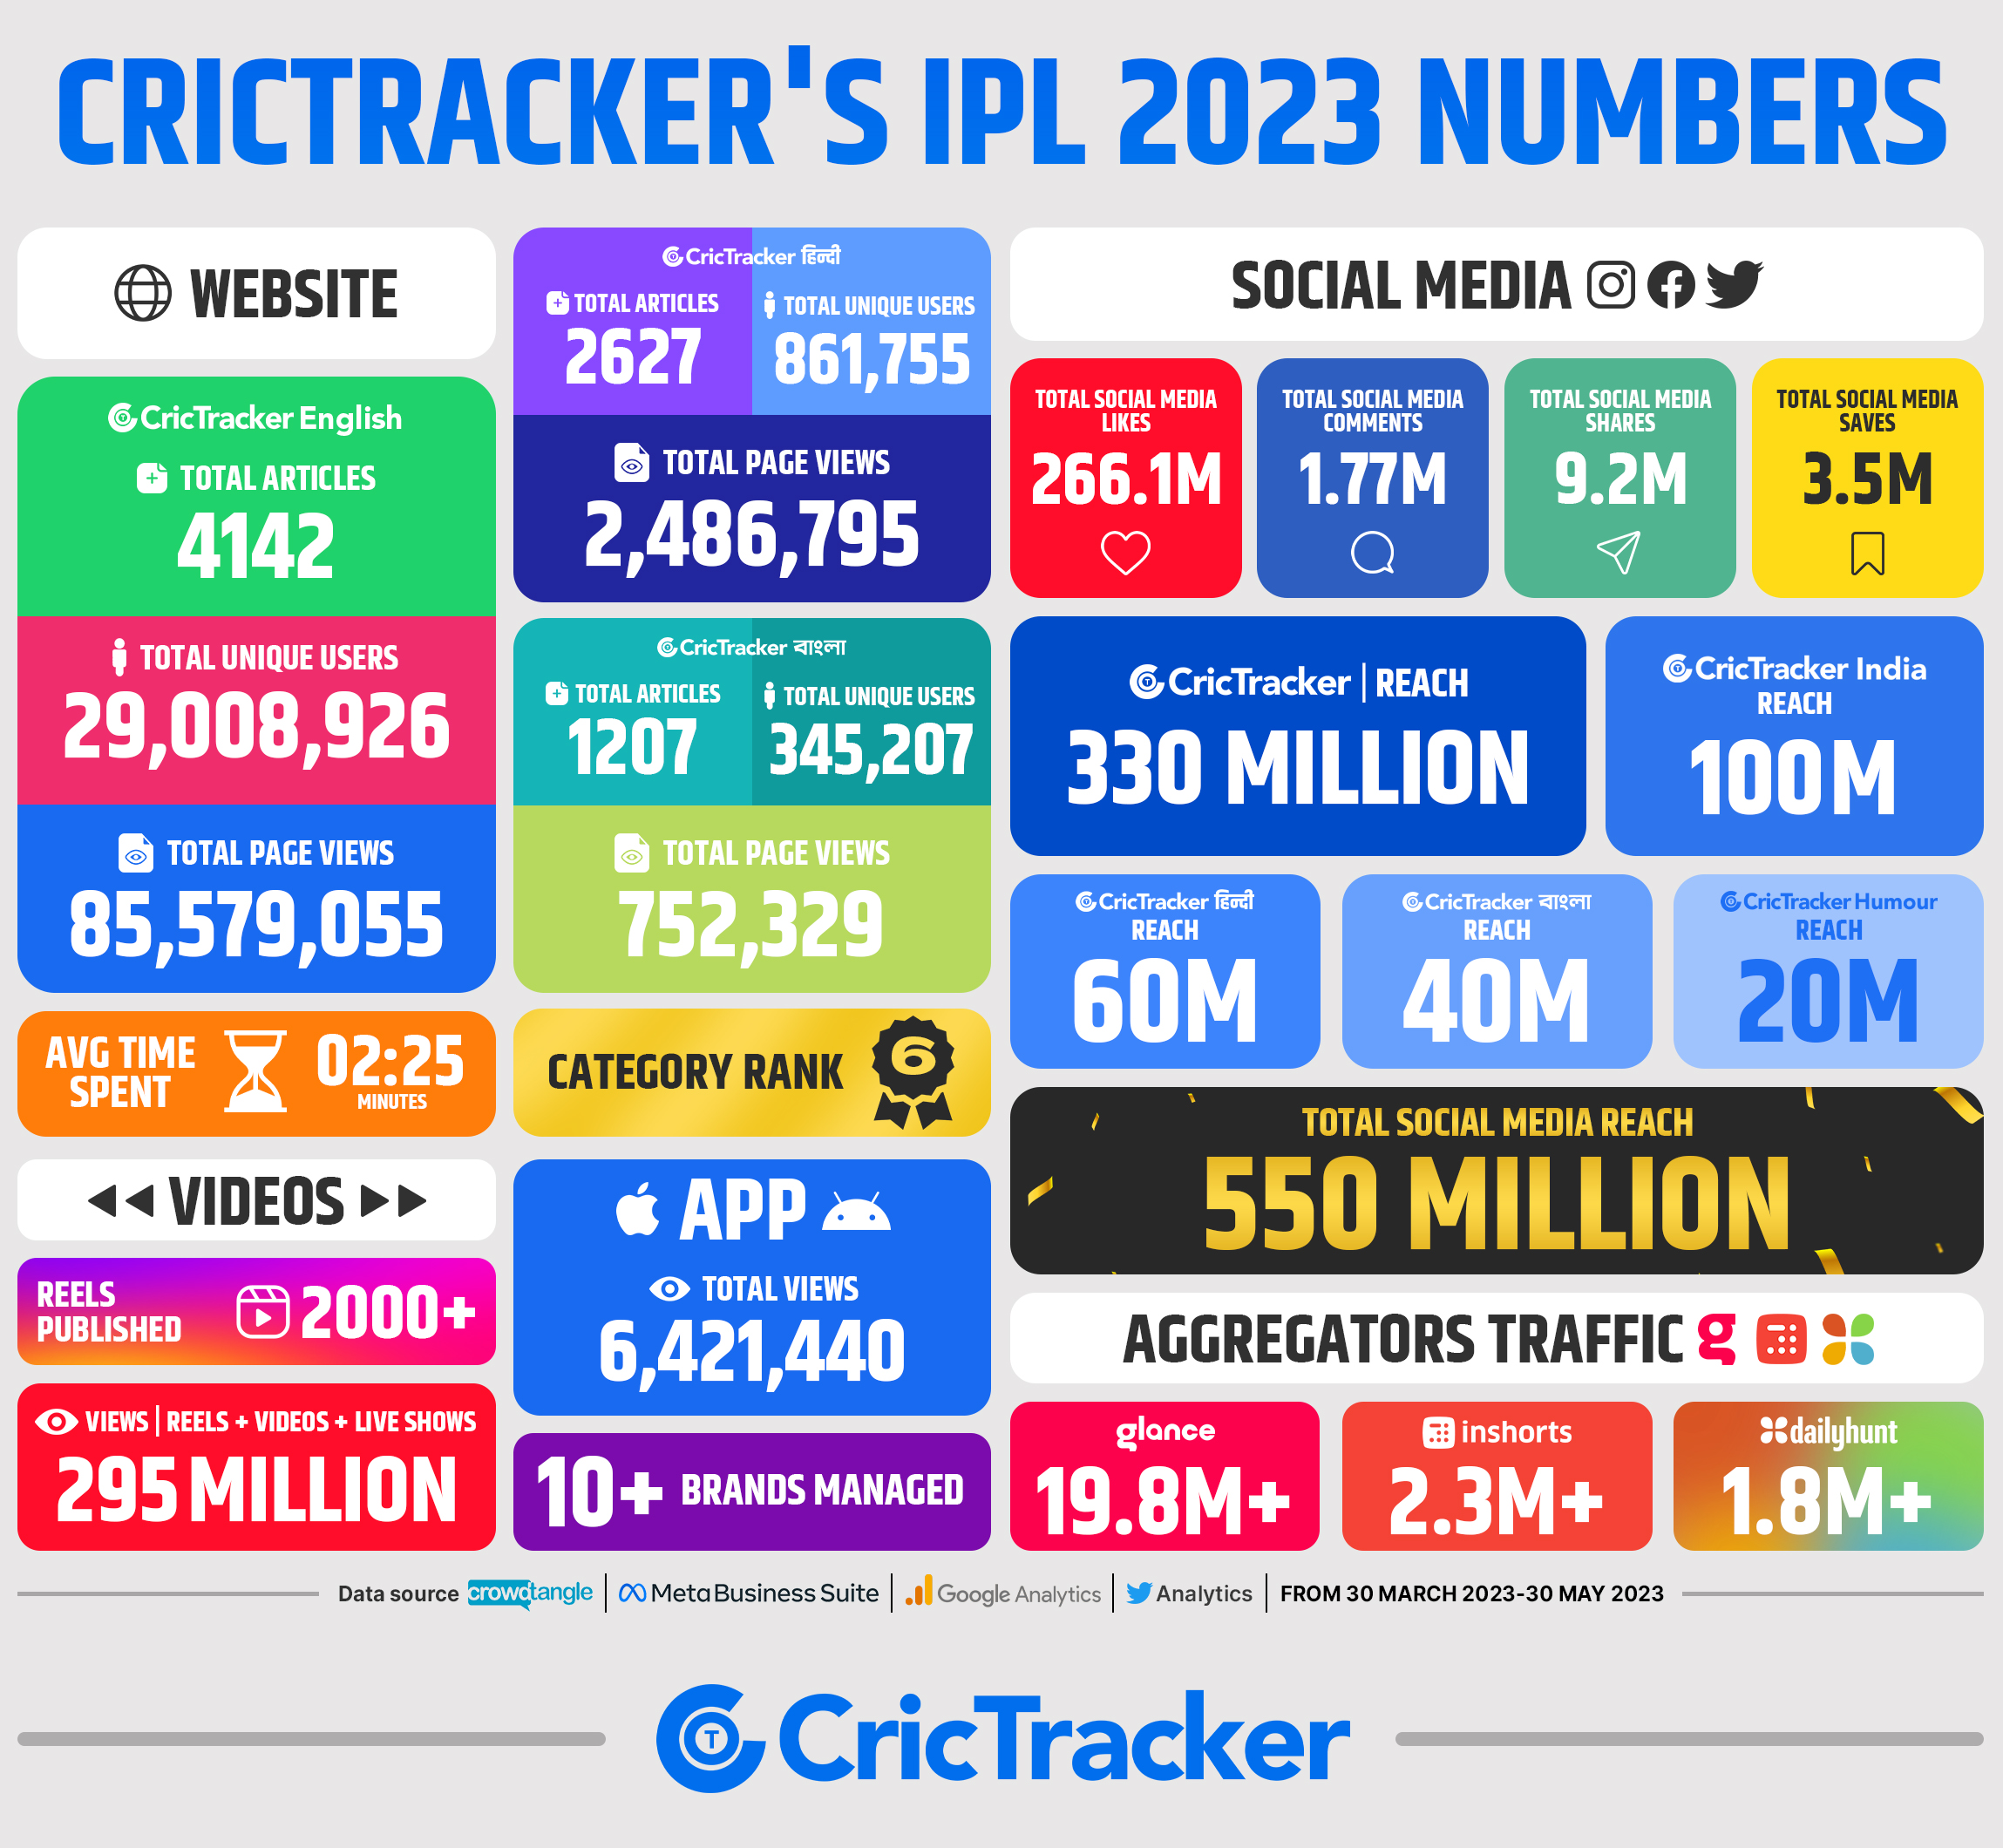 CricTracker's numbers during IPL 2023